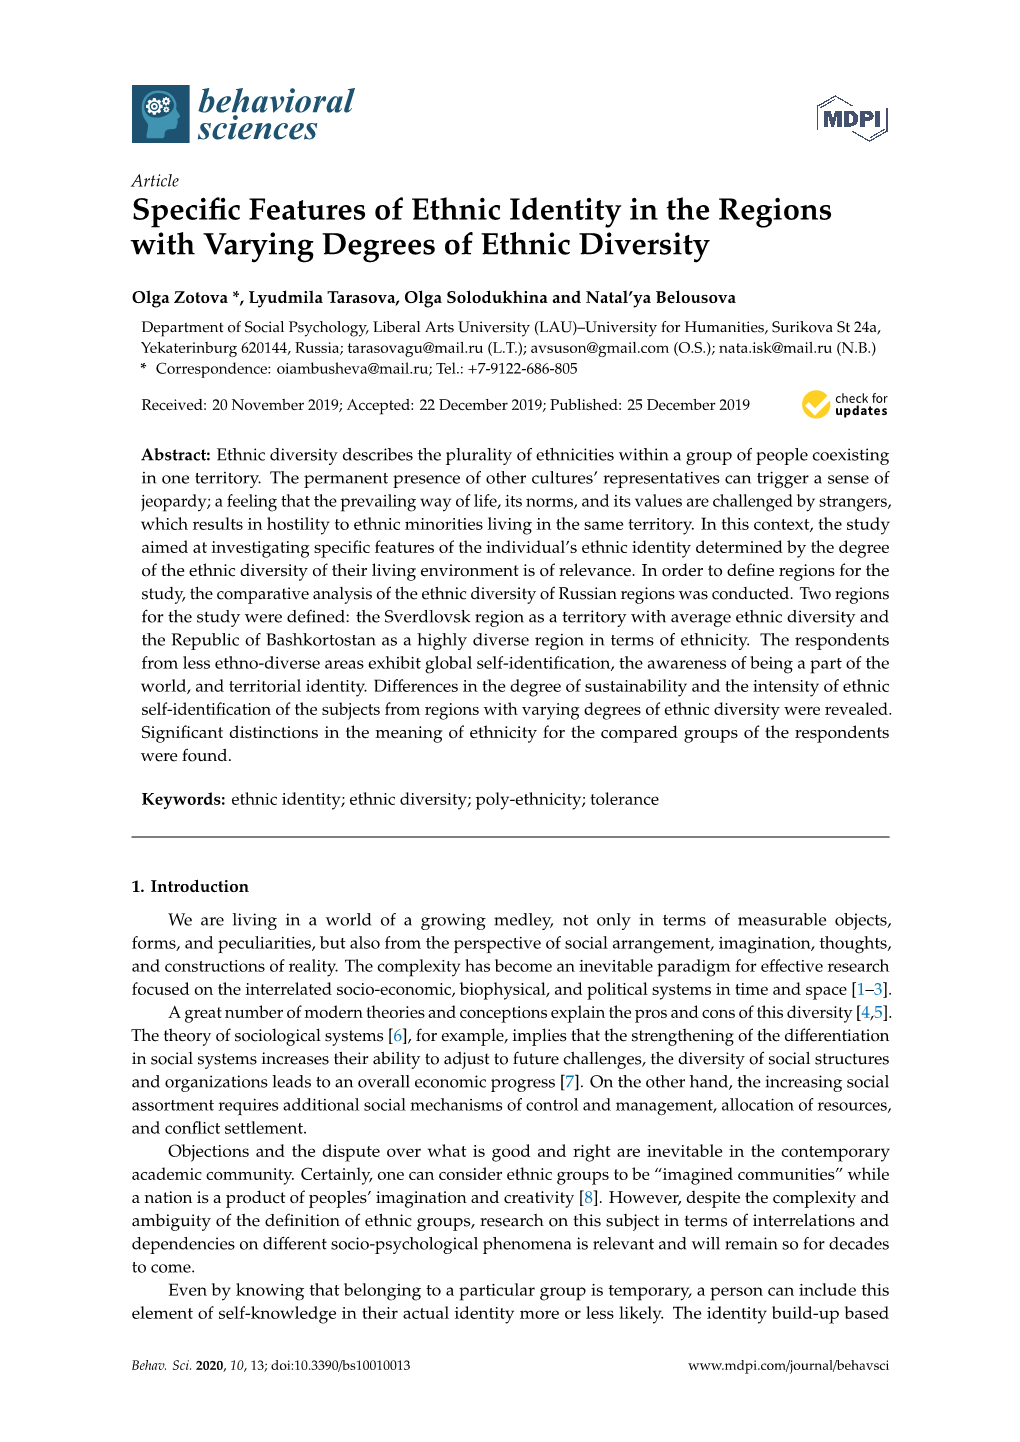 Specific Features of Ethnic Identity in the Regions with Varying Degrees